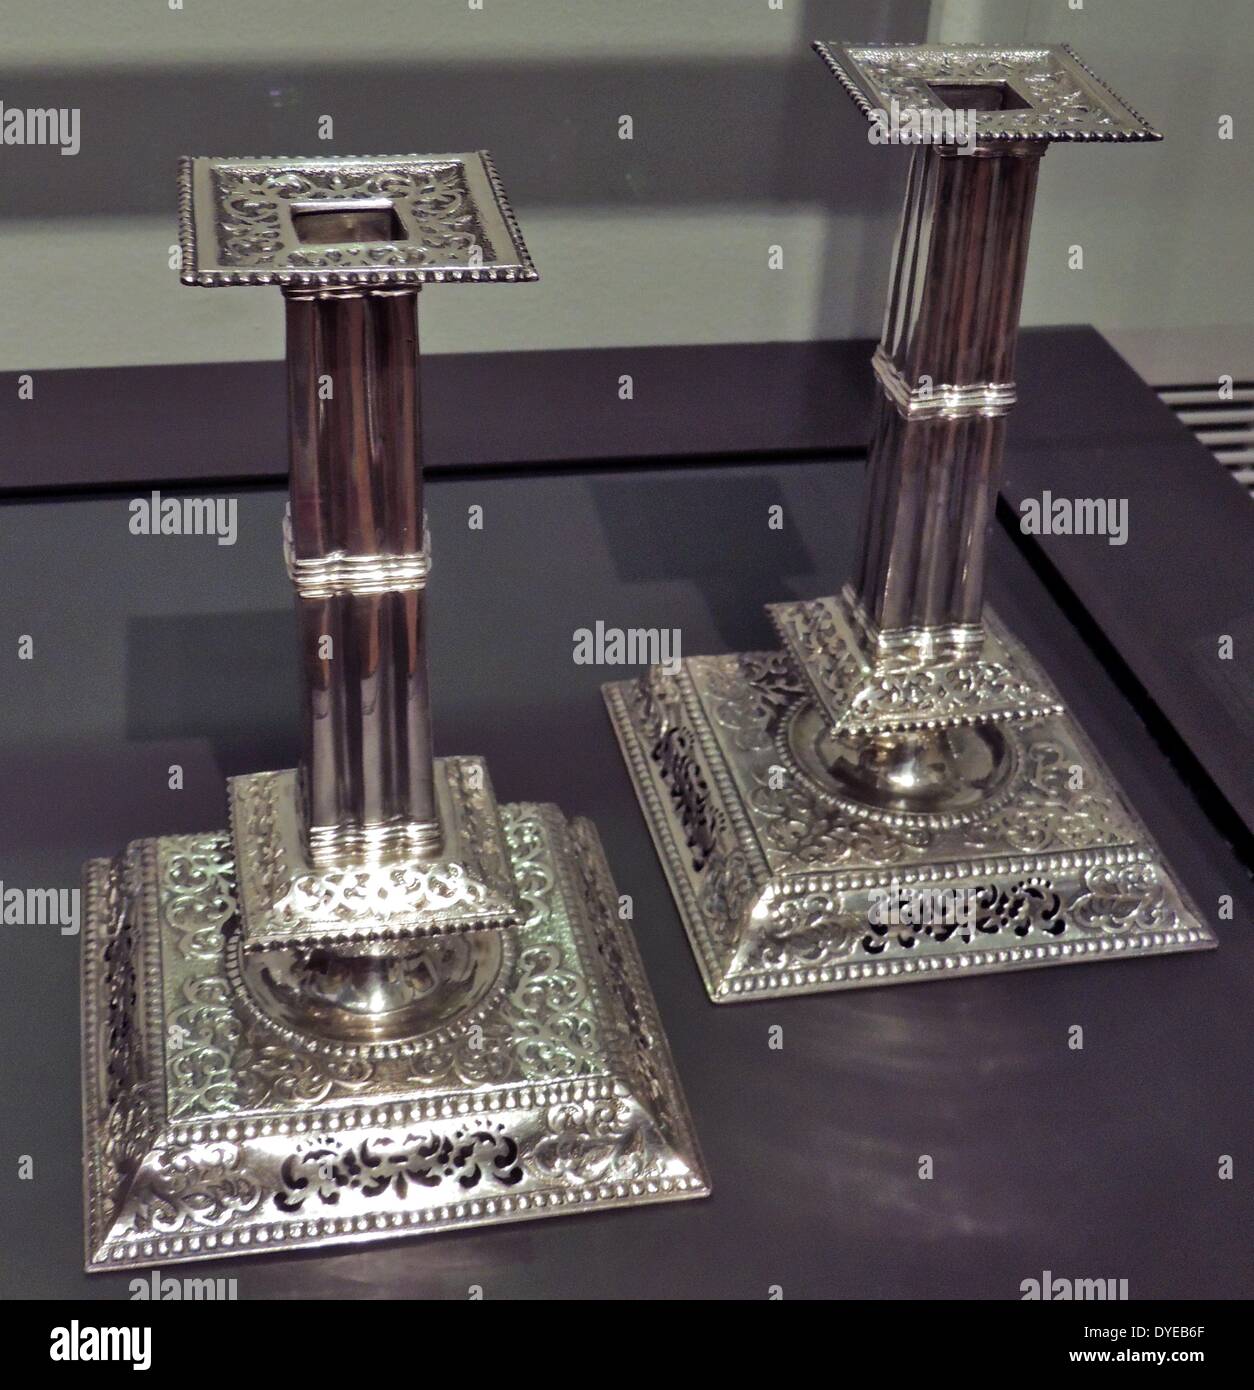 Pair of candlesticks attributed to Jan van Cloon, Batavia (now Jakarta), before 1730, silver. In Batavia, Dutch silversmiths worked alongside Chinese, Indian and local craftsmen. These candlesticks bear the hallmarks of Batavia and the marks of a master IVC, possibly Jan van Cloon. His candlesticks have no Asian features and closely follow European models. Stock Photo